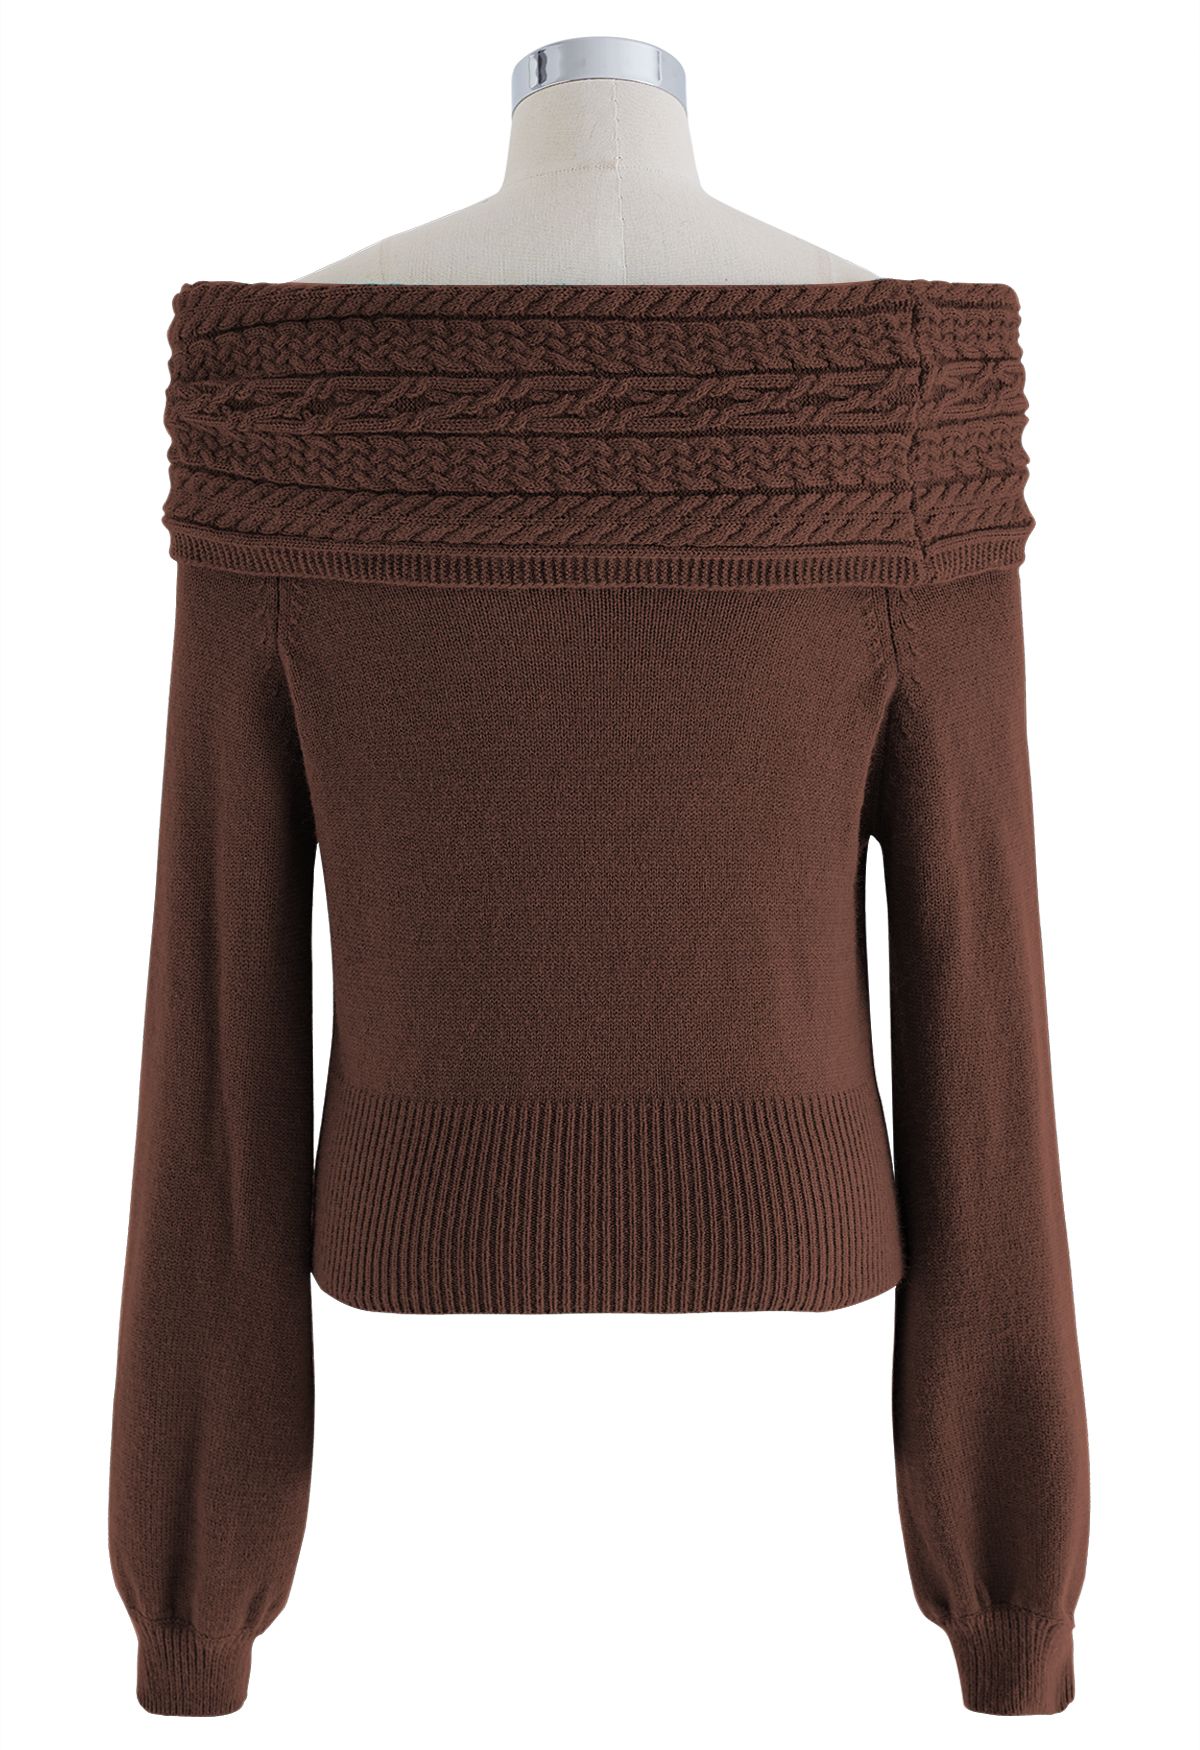 Braided Flap Off-Shoulder Knit Top in Brown